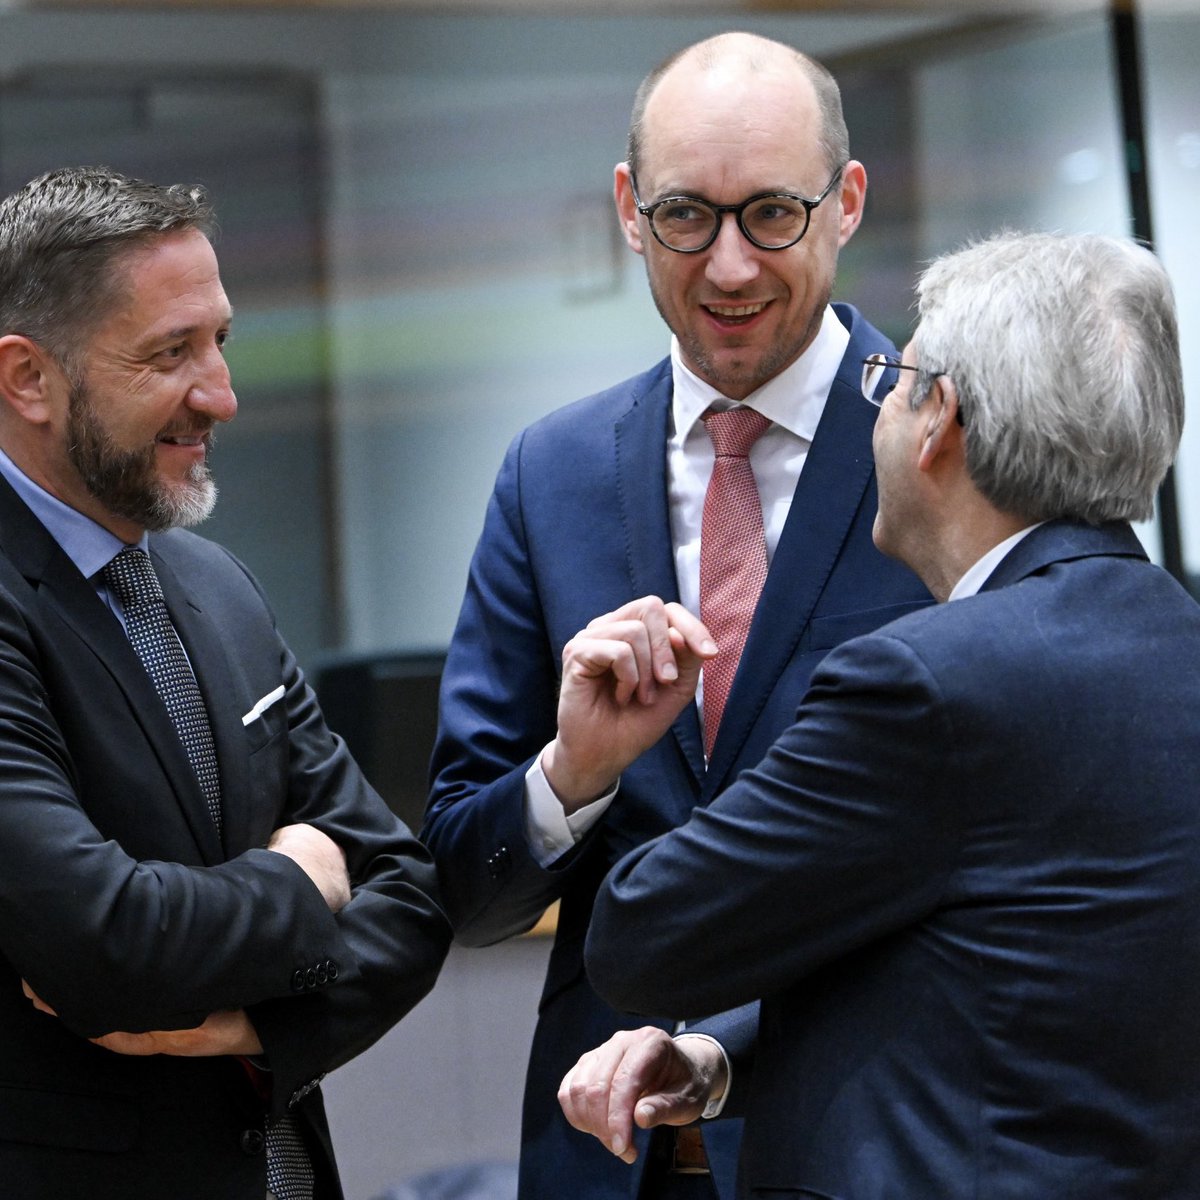 Finance ministers gather in Brussels today for the monthly #Eurogroup meeting. They discuss the macroeconomic developments and fiscal policy in the euro area in 2025 and the future of the Capital Markets Union.